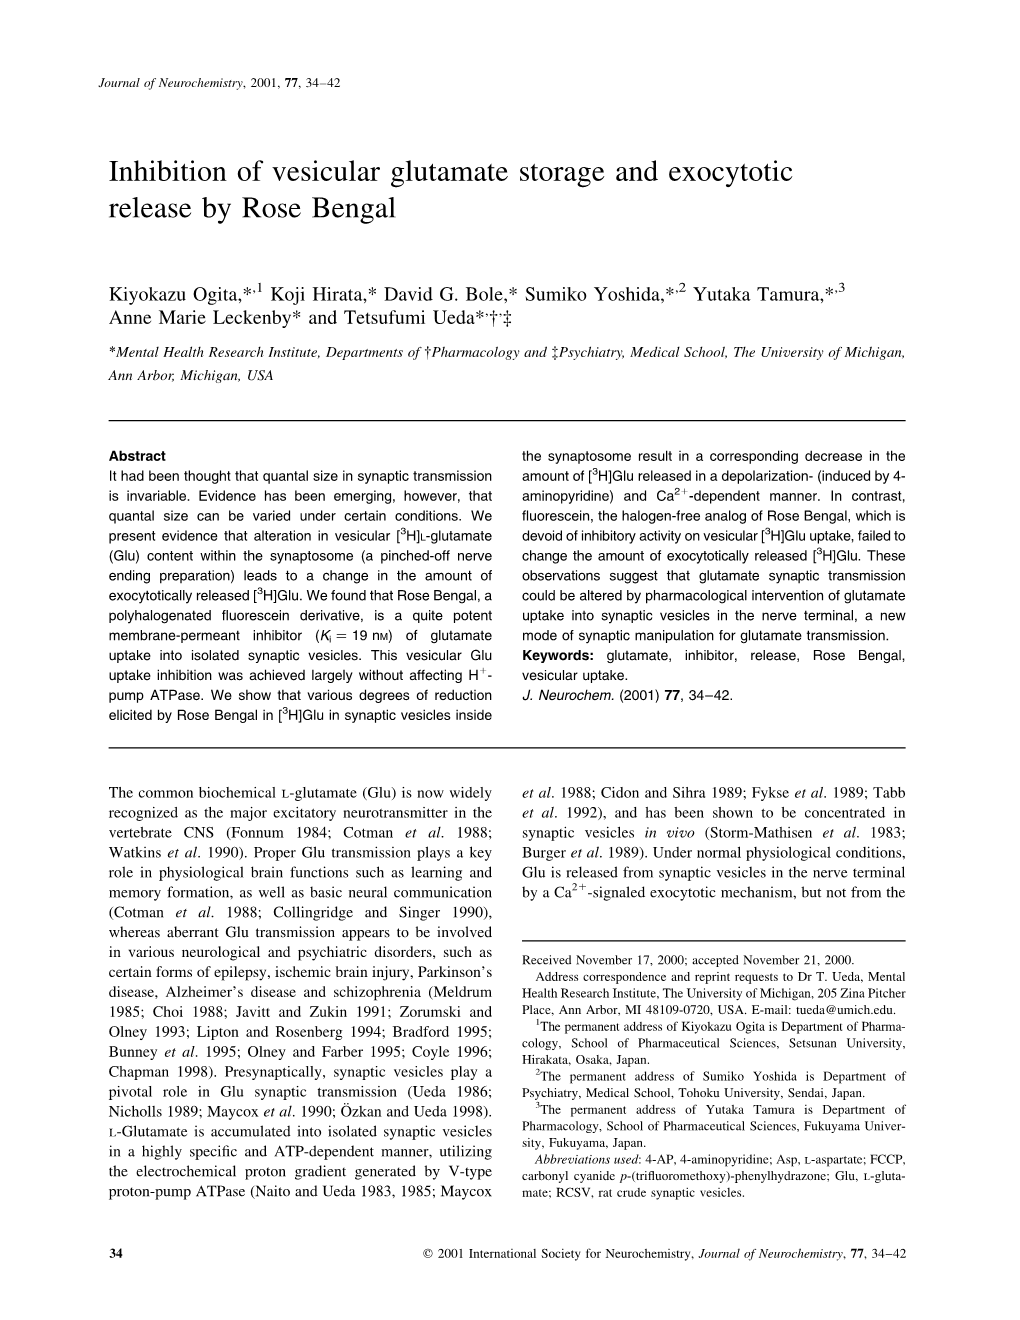 Inhibition of Vesicular Glutamate Storage and Exocytotic Release by Rose Bengal